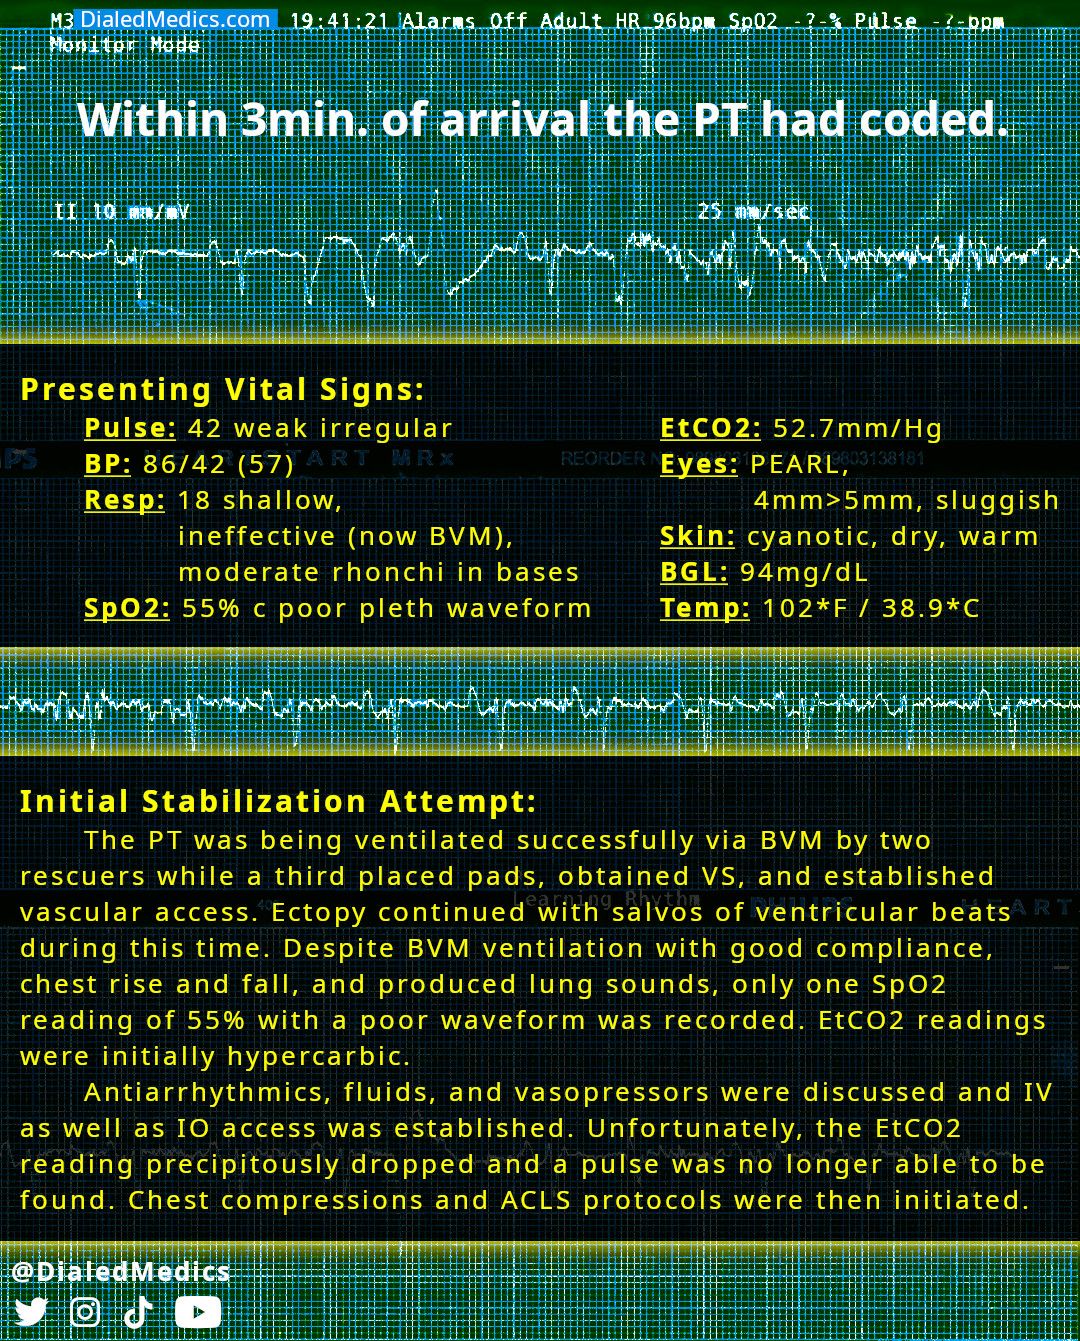 Initial vital signs, stabilization, and eventual loss of pulses.